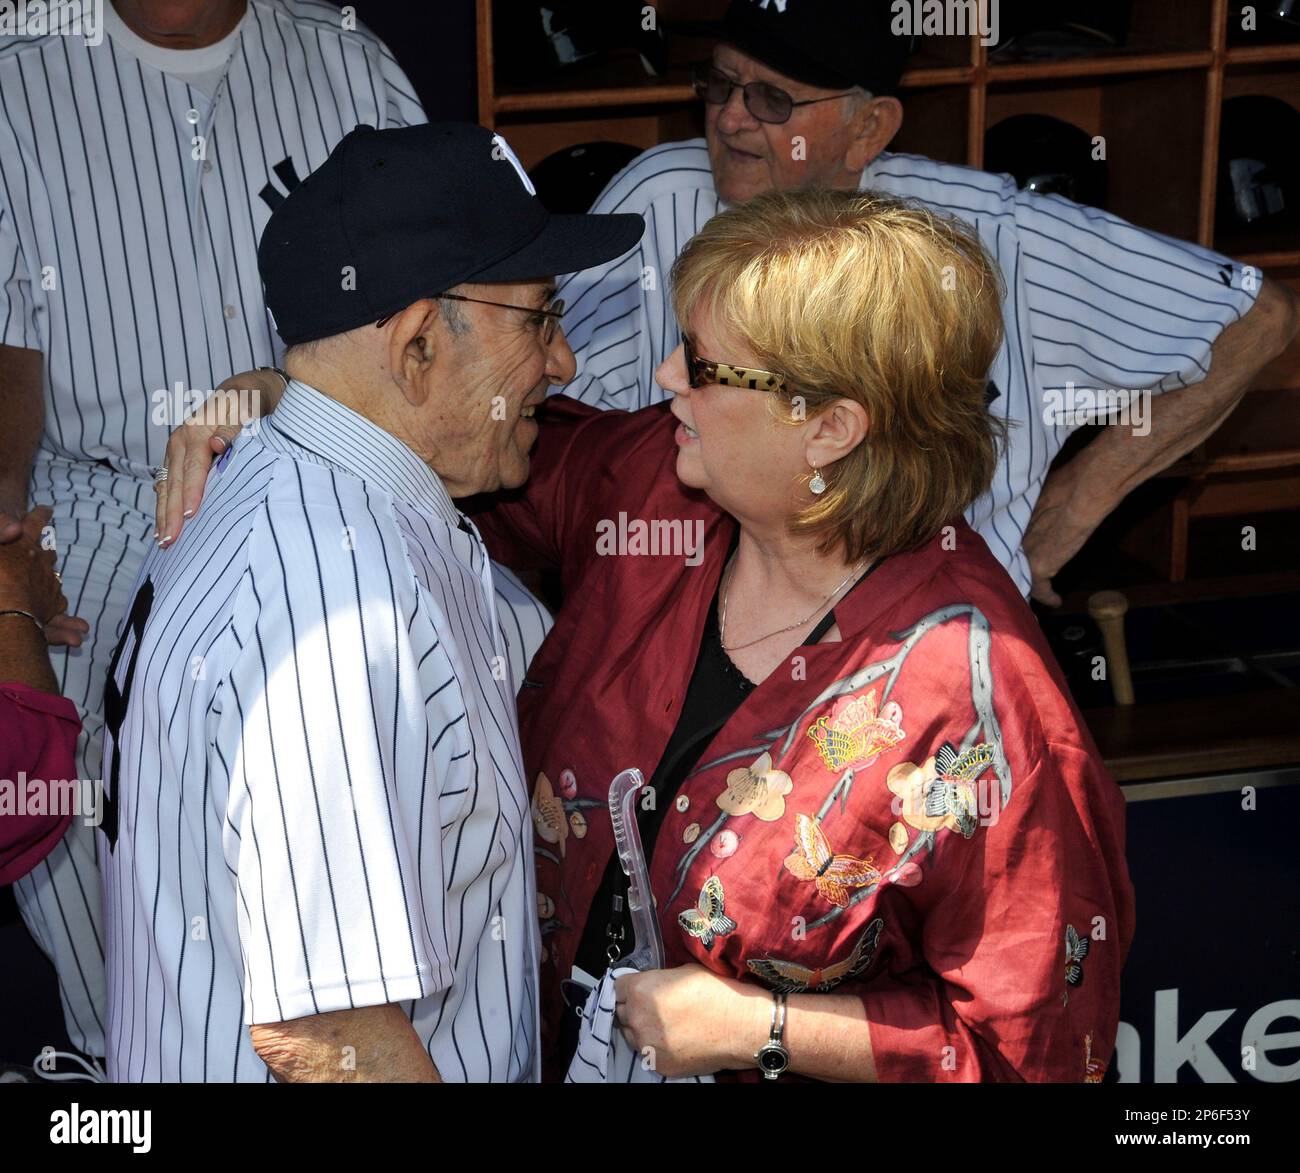 Former New York Yankees star catcher Yogi Berra and Diana Munson (the late  Thurman Munson's wife) during Old Timers Day at Yankee Stadium on June 26,  2011 in Bronx, NY. (AP Photo/Tomasso